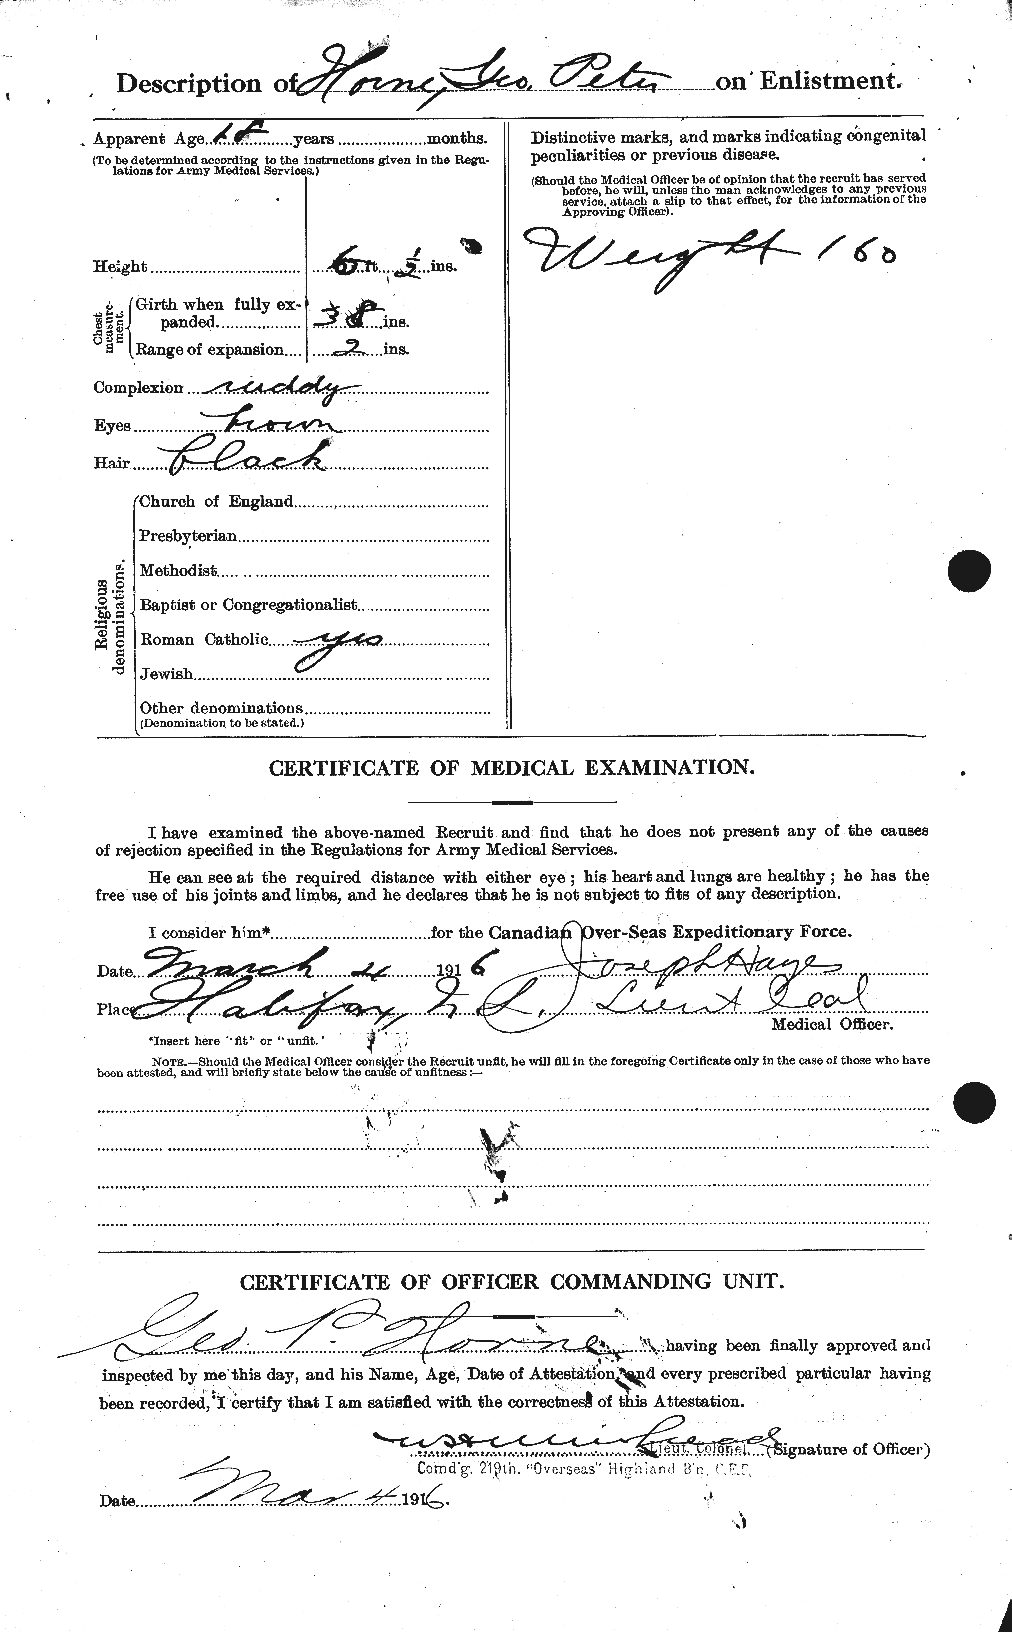 Personnel Records of the First World War - CEF 399613b